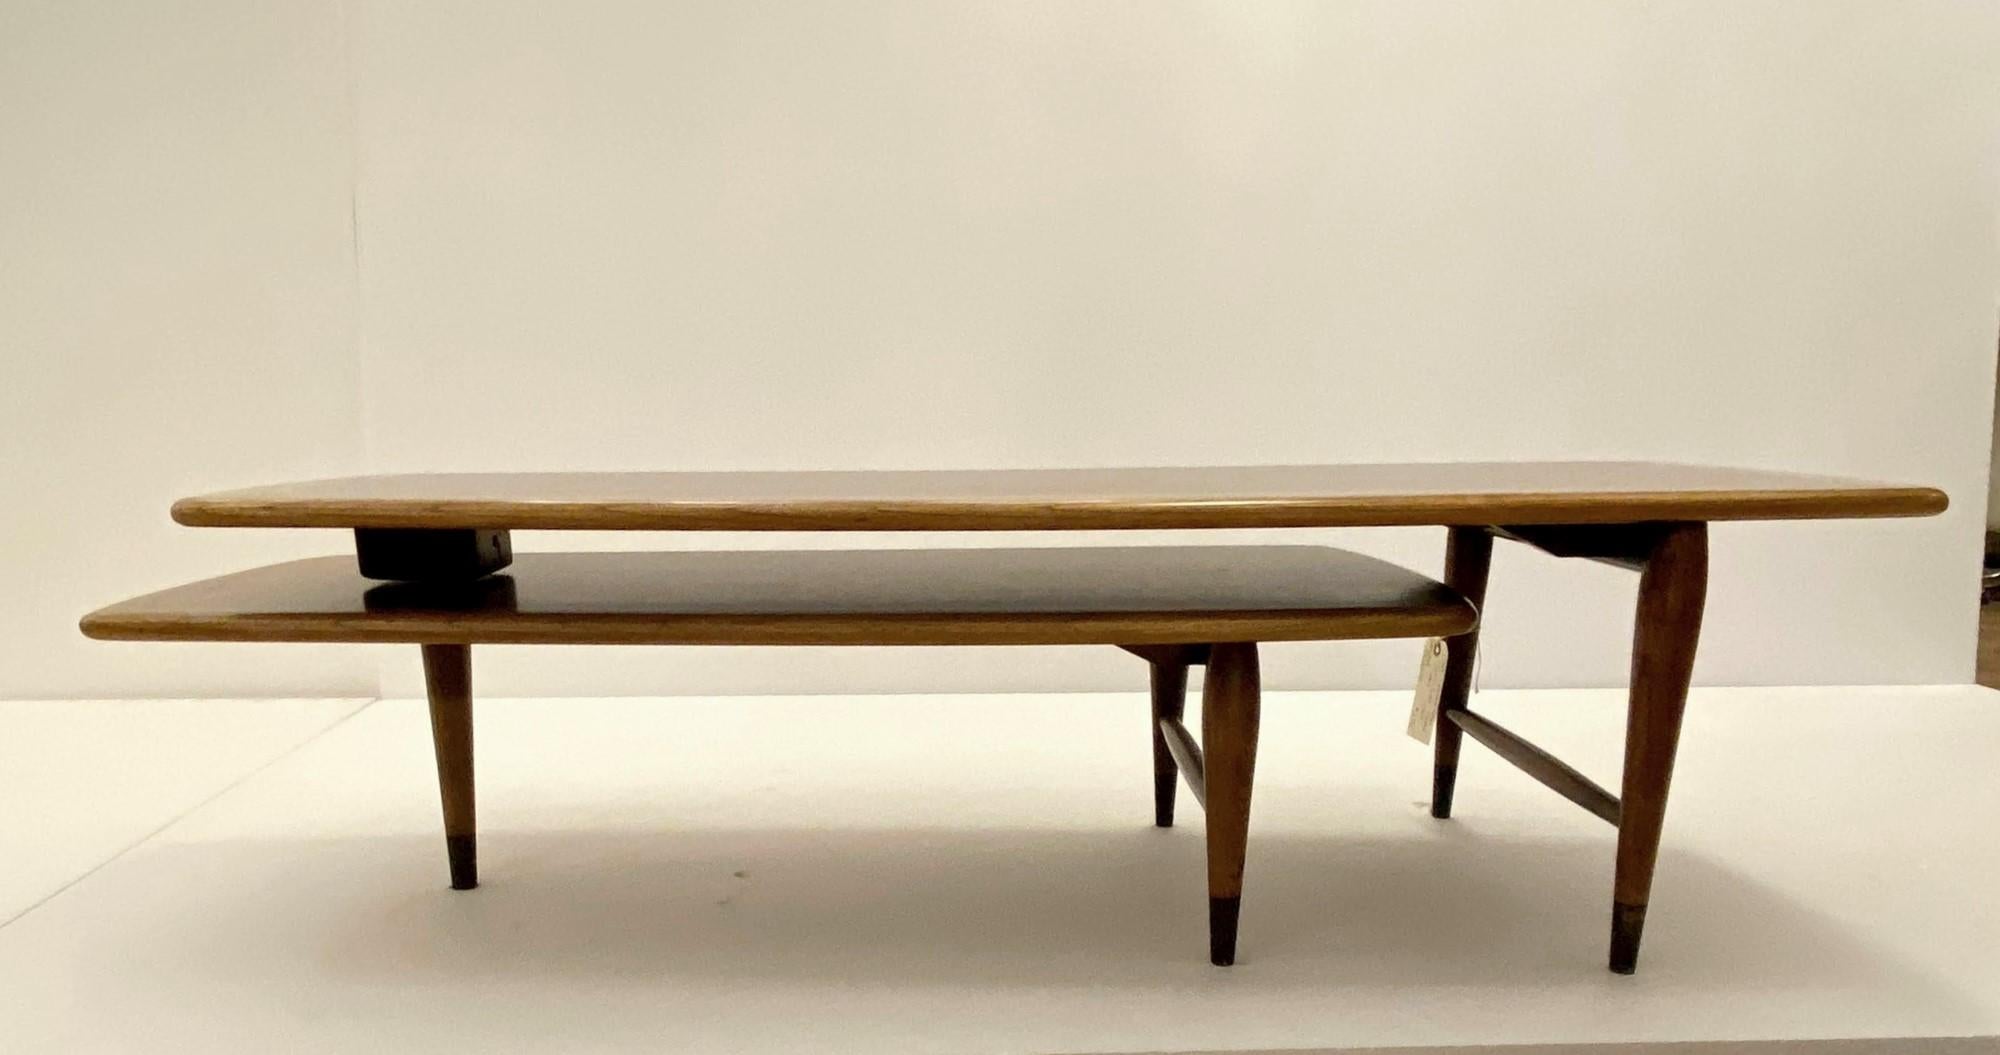 American 1960s Lane Switchblade Coffee Table Acclaim Two-Piece Adjustable by Andre Bus